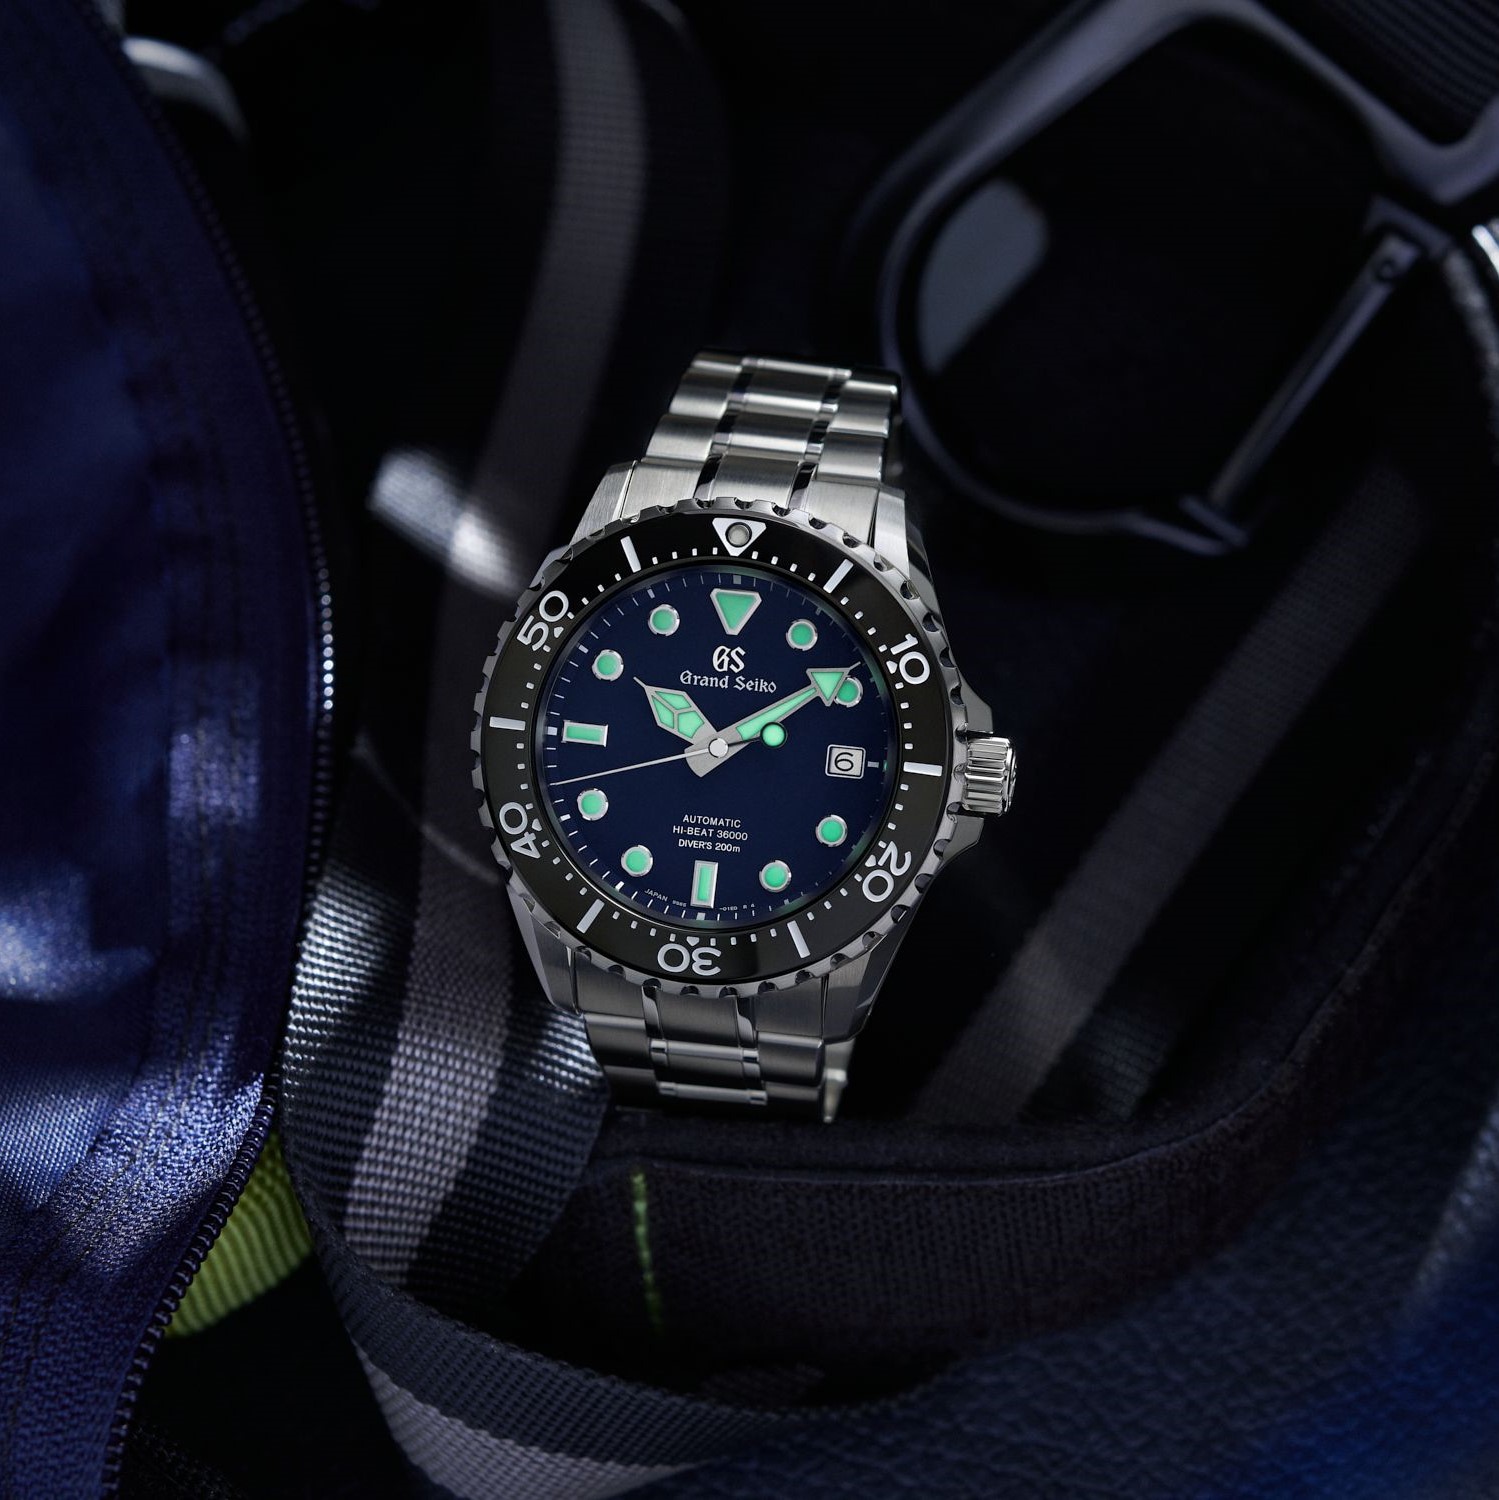 Grand Seiko Mechanical Hi-Beat Diver's | Seiko Boutique | The Official UK  Online Store